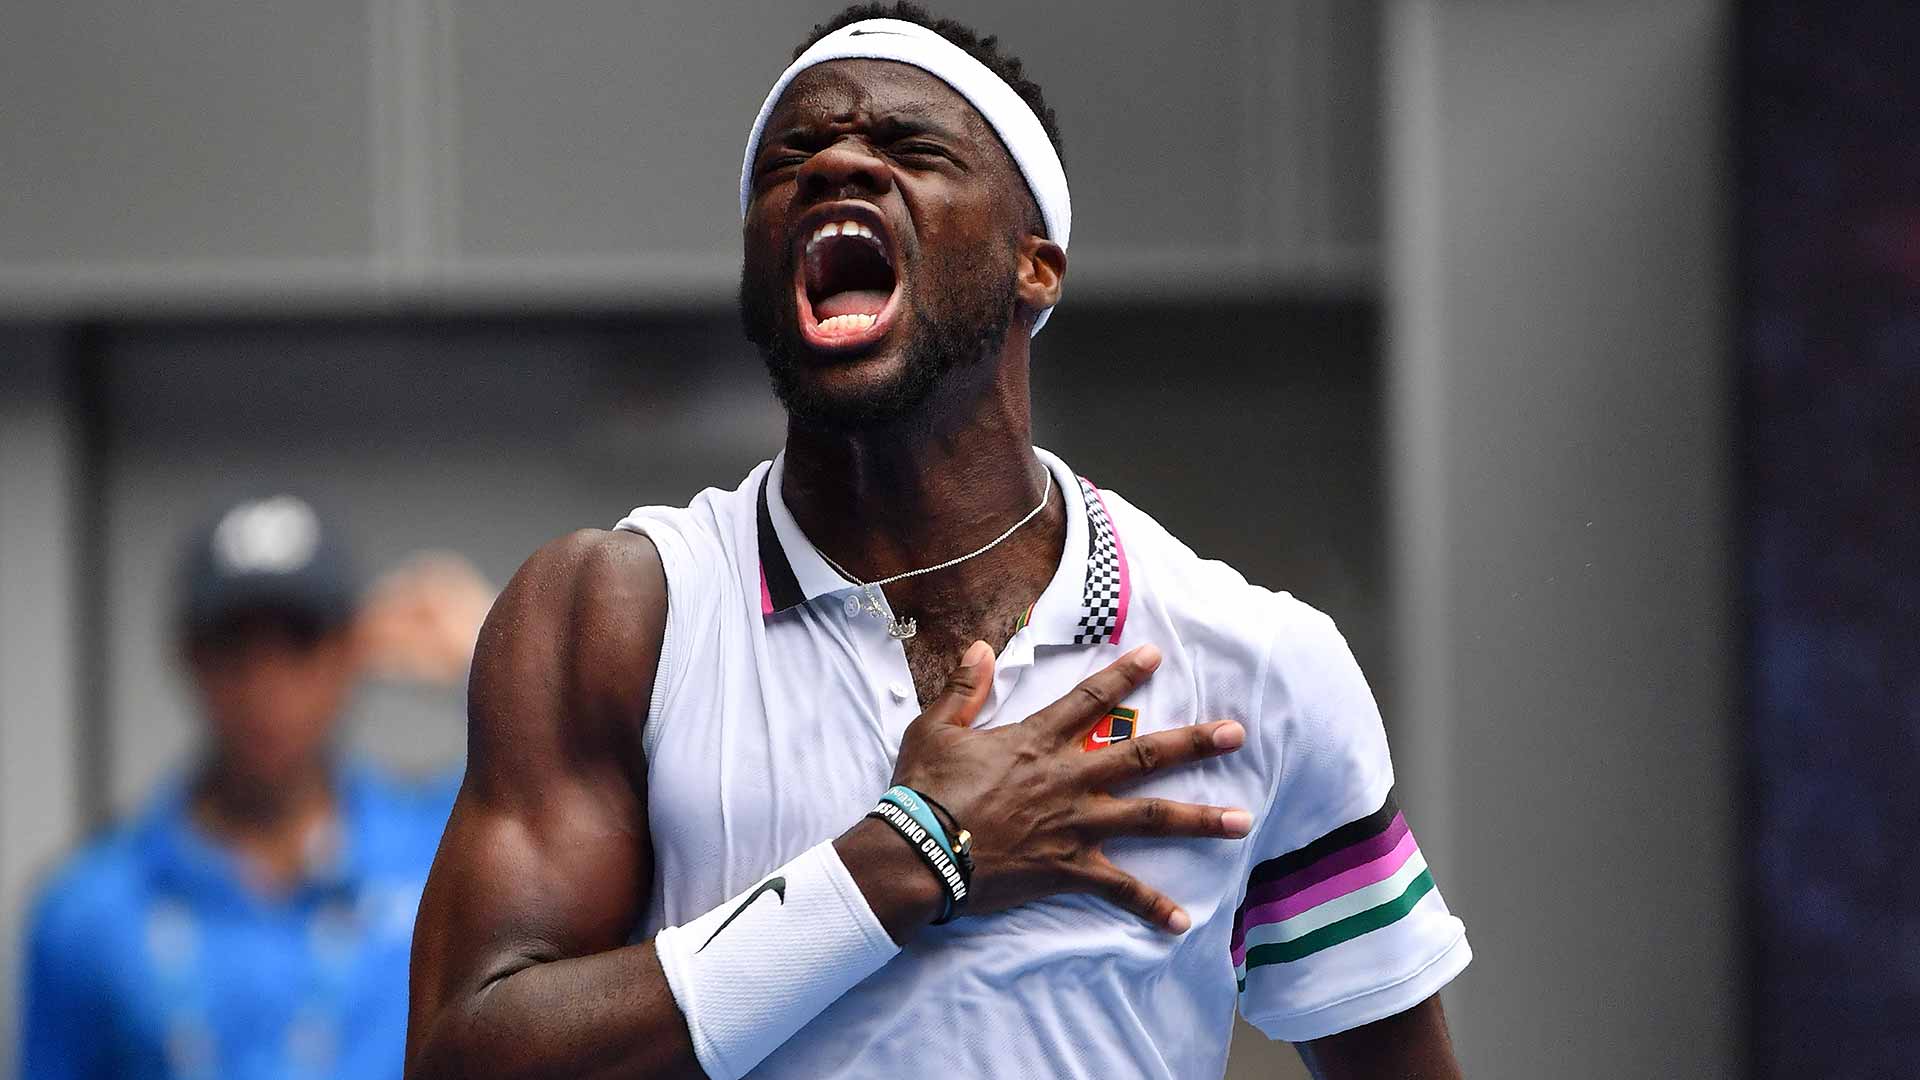 Frances Tiafoe upsets Kevin Anderson at the Australian Open